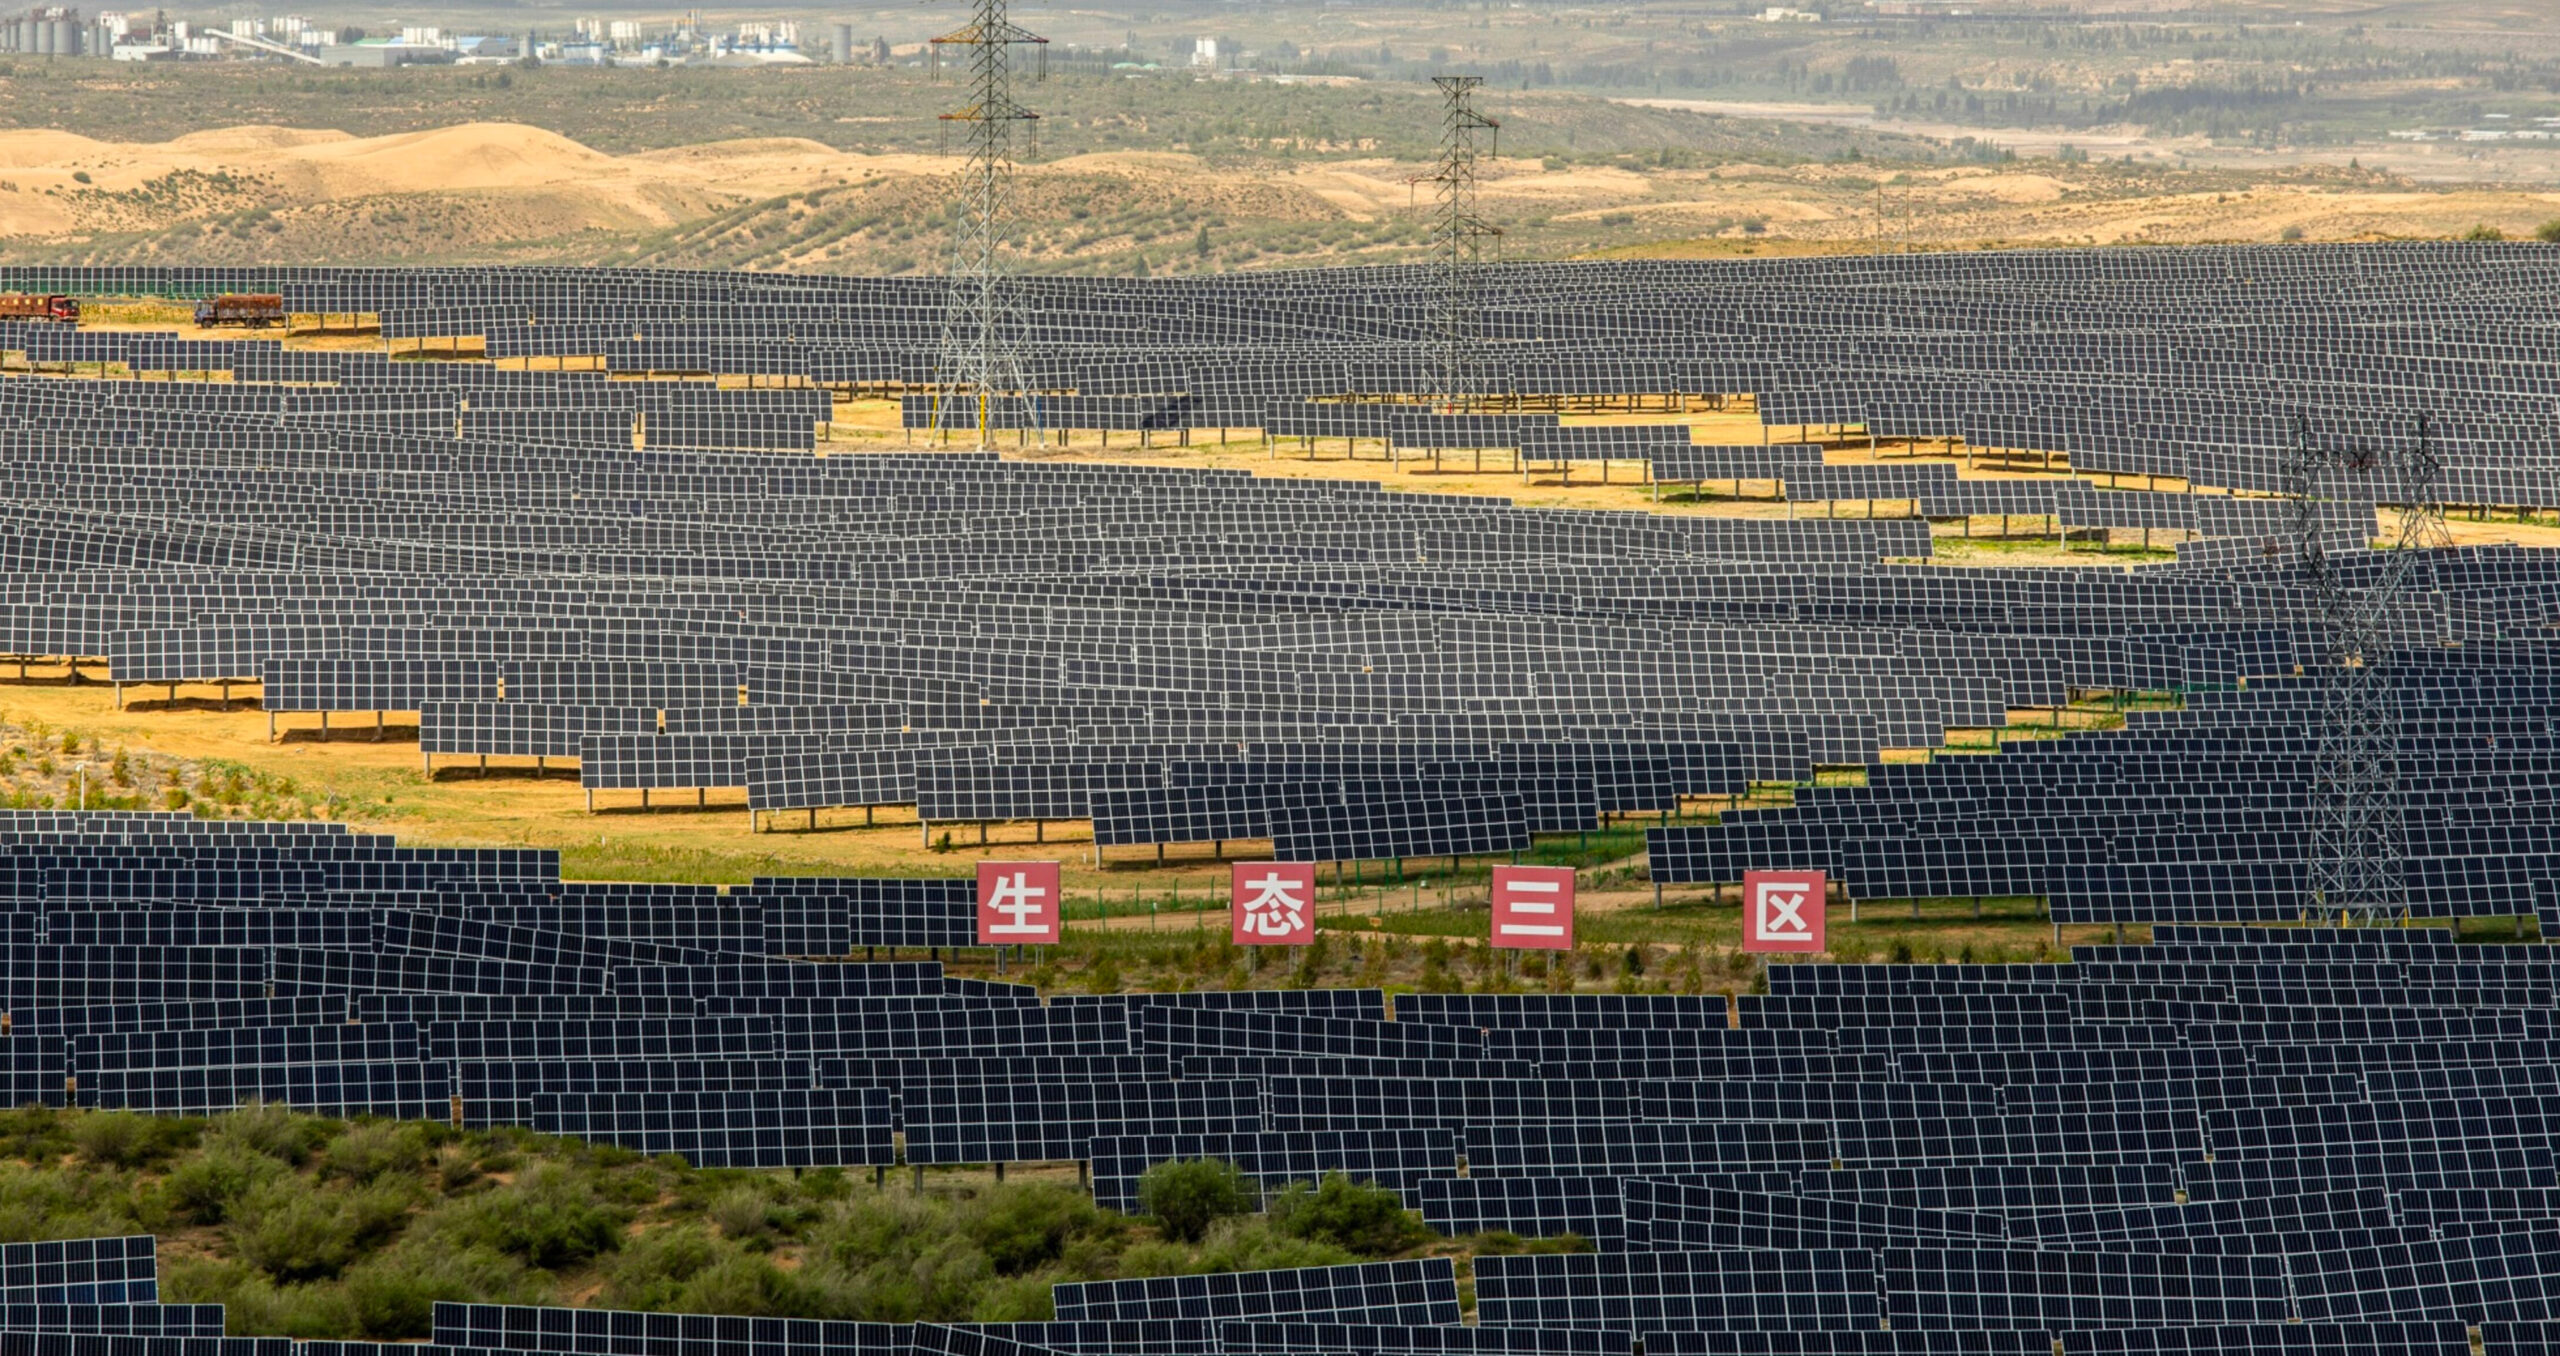 Tianjiao Green Energy Photovoltaic Project in Ordos, China. Four methodologies have been approved under the country’s VCM: solar thermal power, forestation, mangrove cultivation, and grid-connected offshore wind projects.  (Photo: Qilai Shen/Bloomberg) 